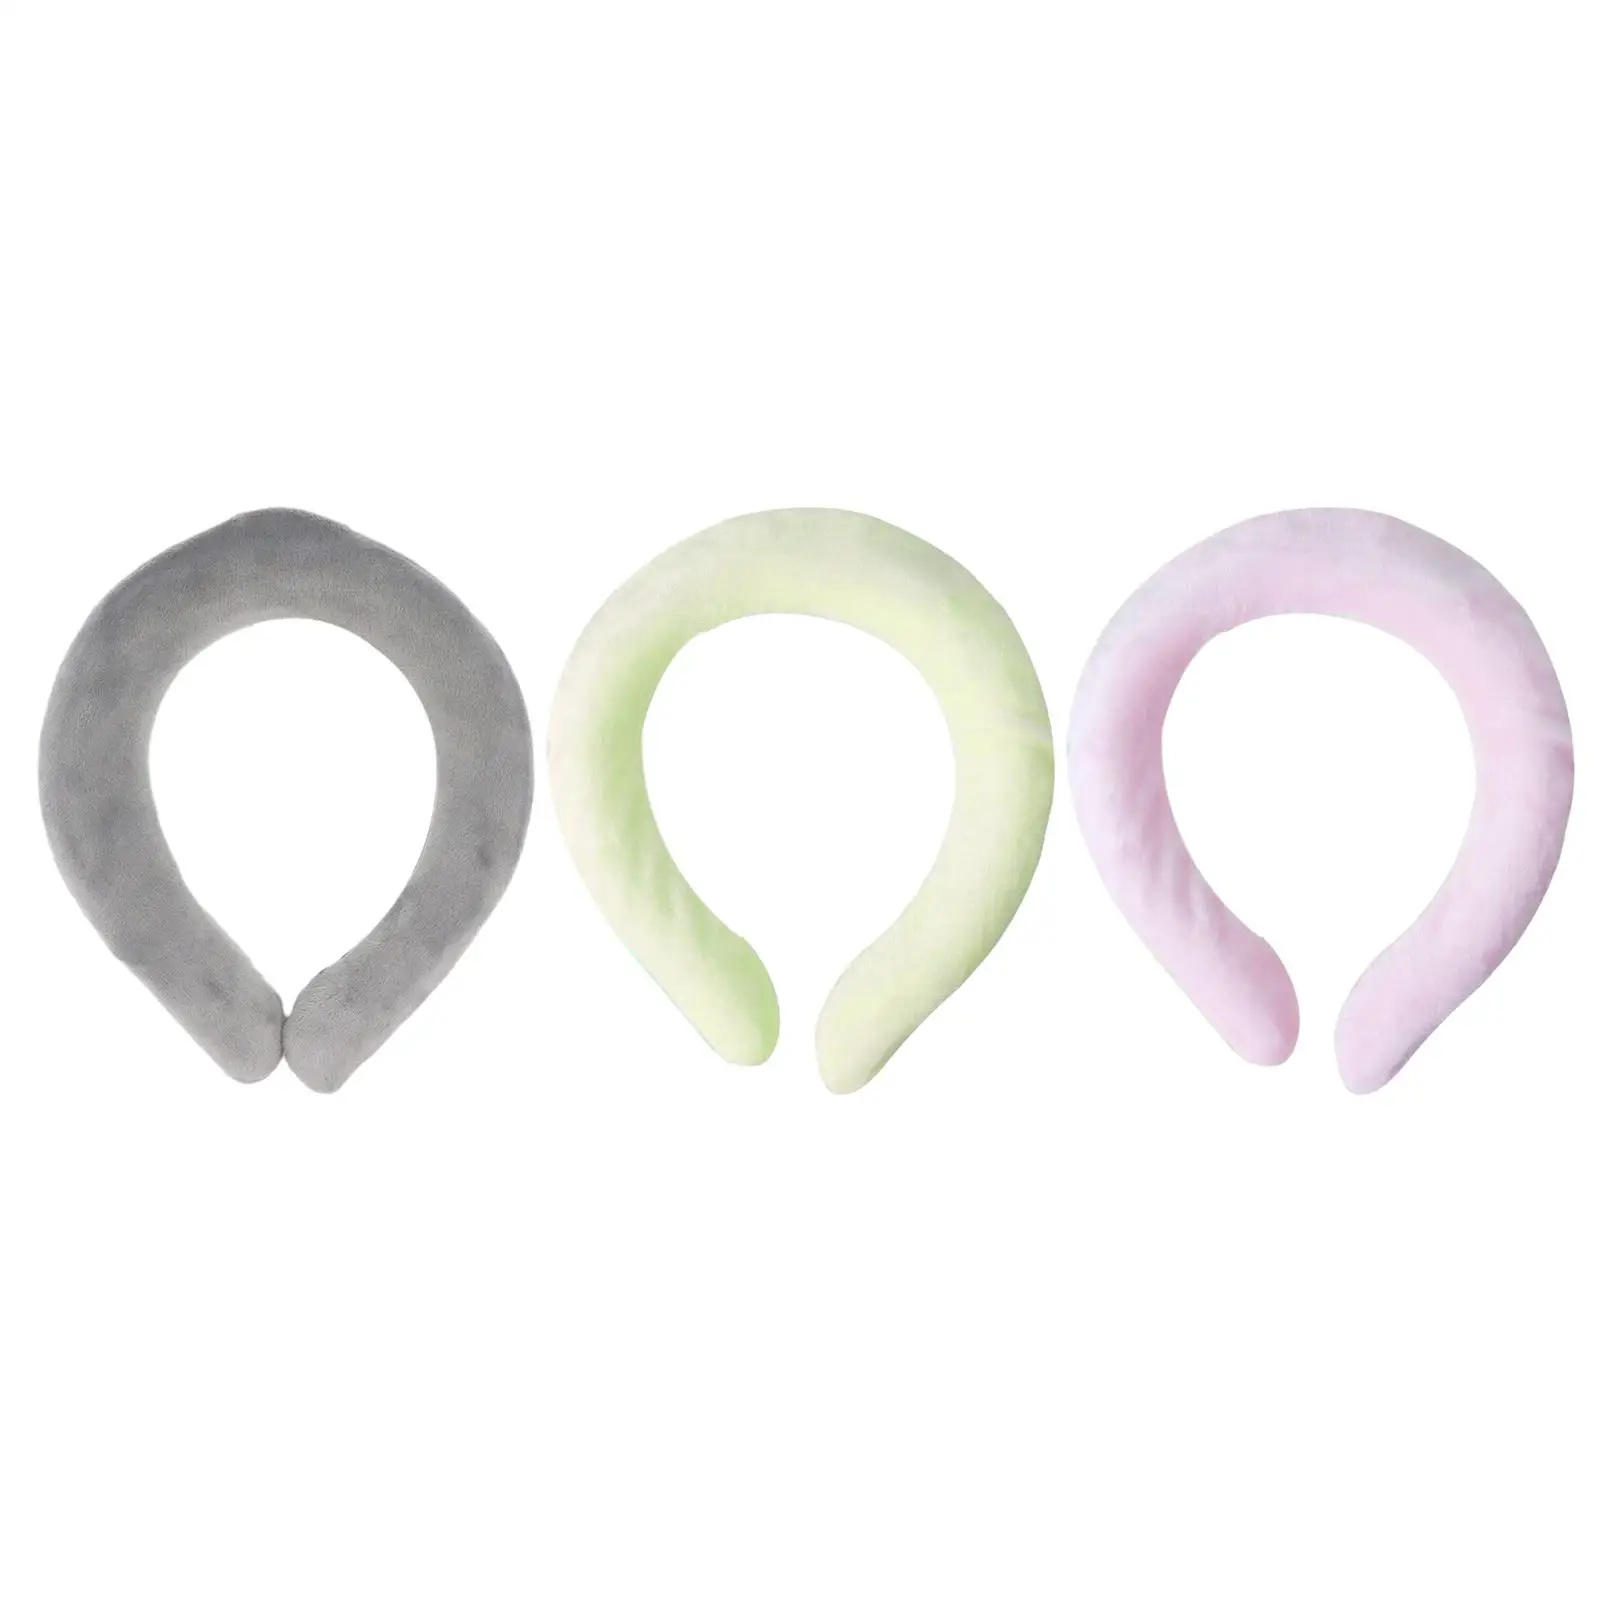 Neck Heat Ring Wearable Hot Pack for Cold Weather Microwavable Portable Hands Free Neck Heating Tube Neck Warm Ring Neck Warmer